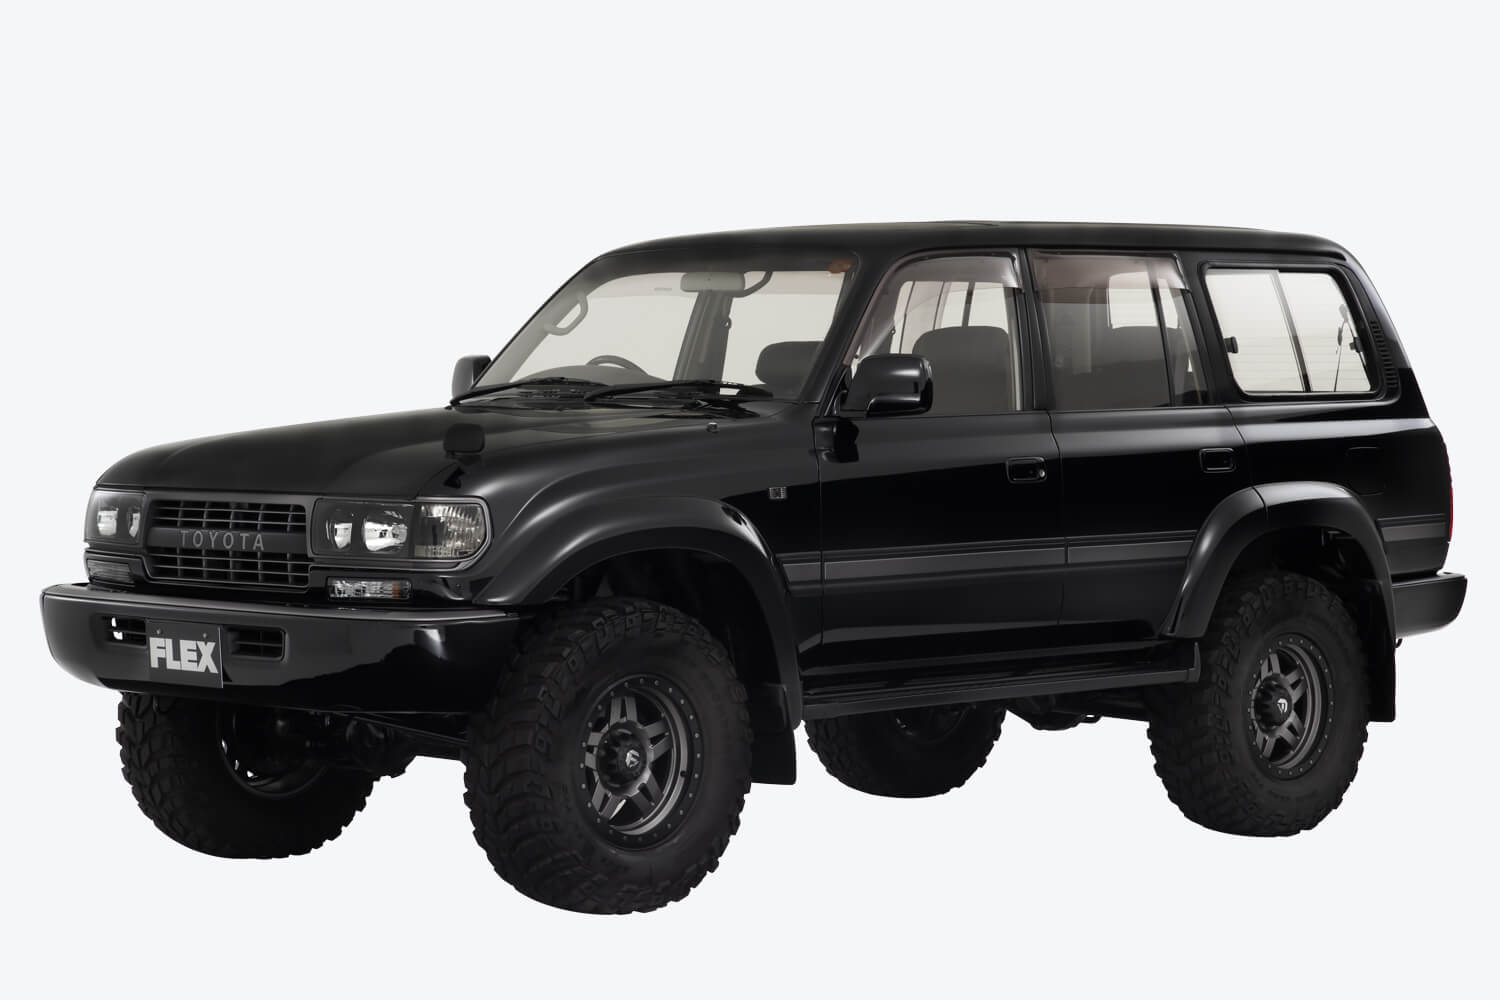 How to buy 80 Series Landcruiser, the greatest 4×4 of all time